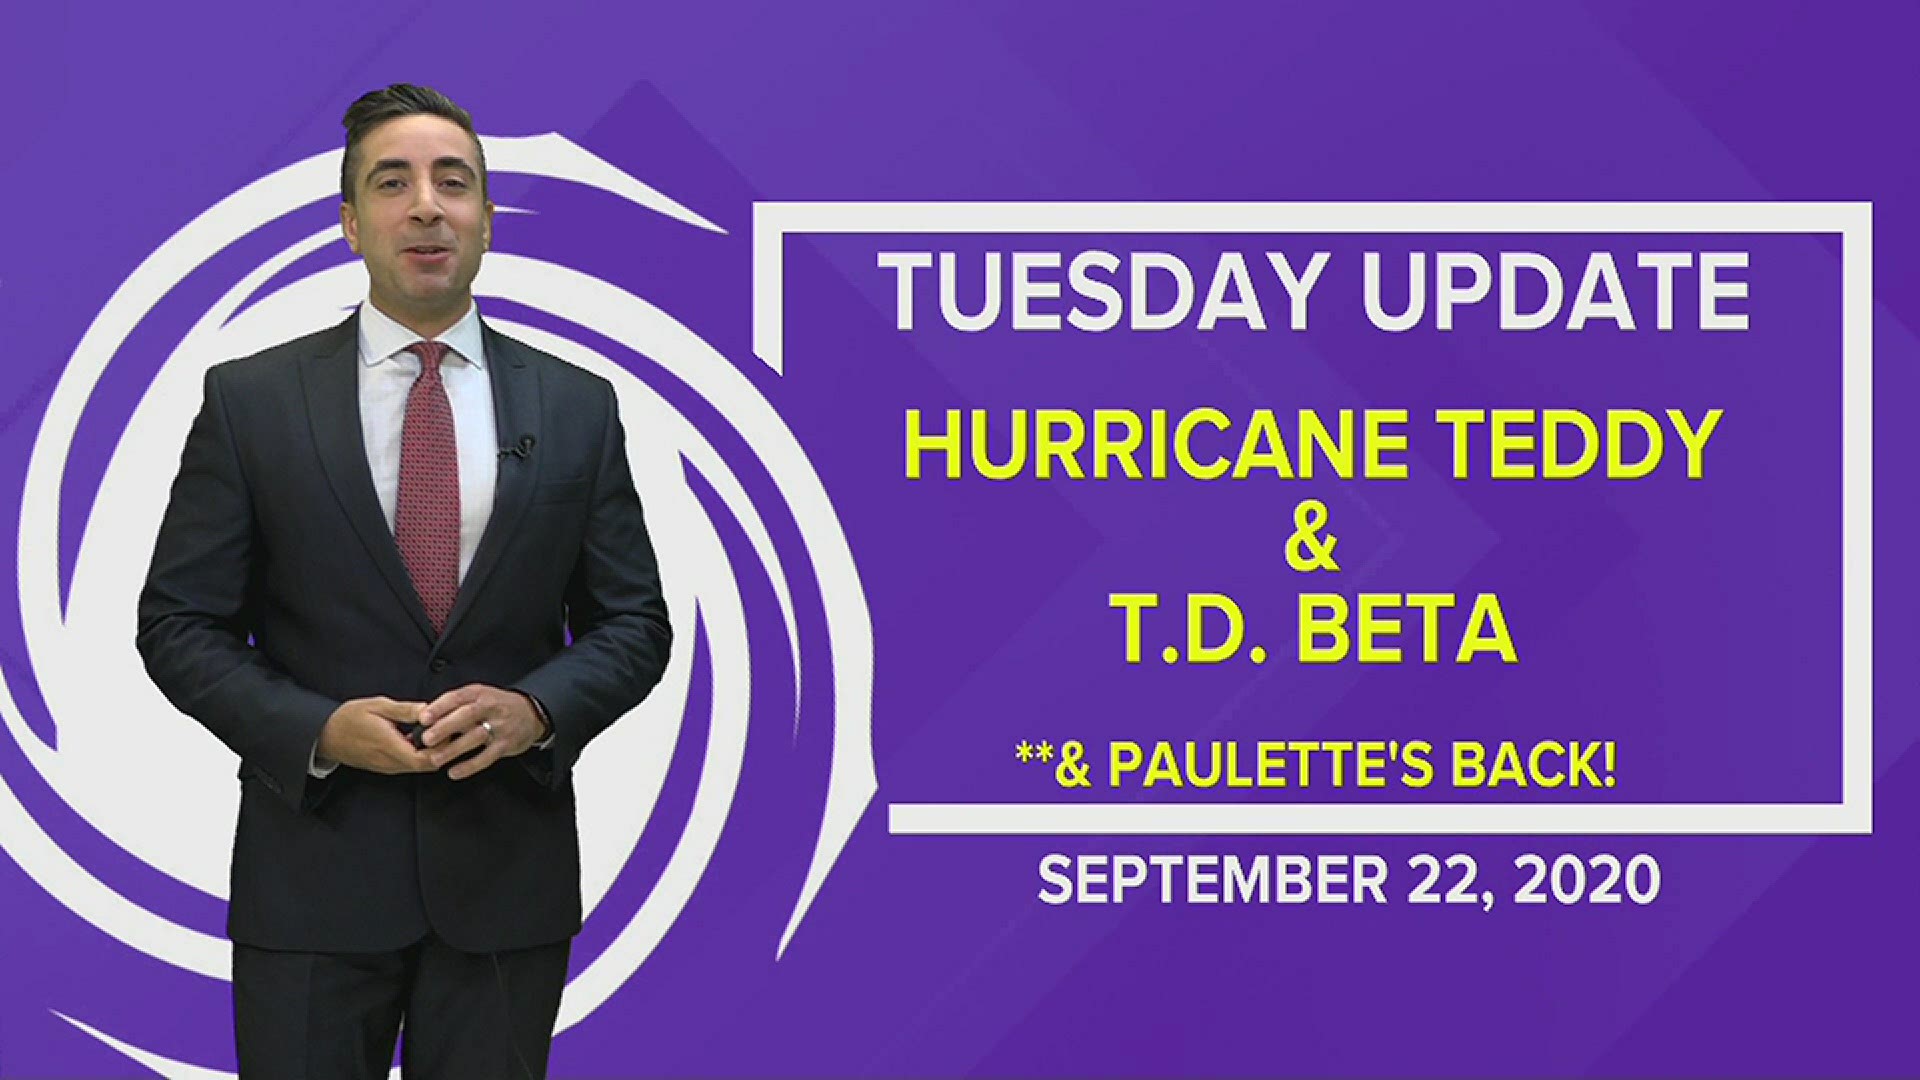 13News Now Meteorologist Tim Pandajis has the latest on Hurricane Teddy and Tropical Depression Beta. And guess what? Paulette's back! This time as a tropical storm!